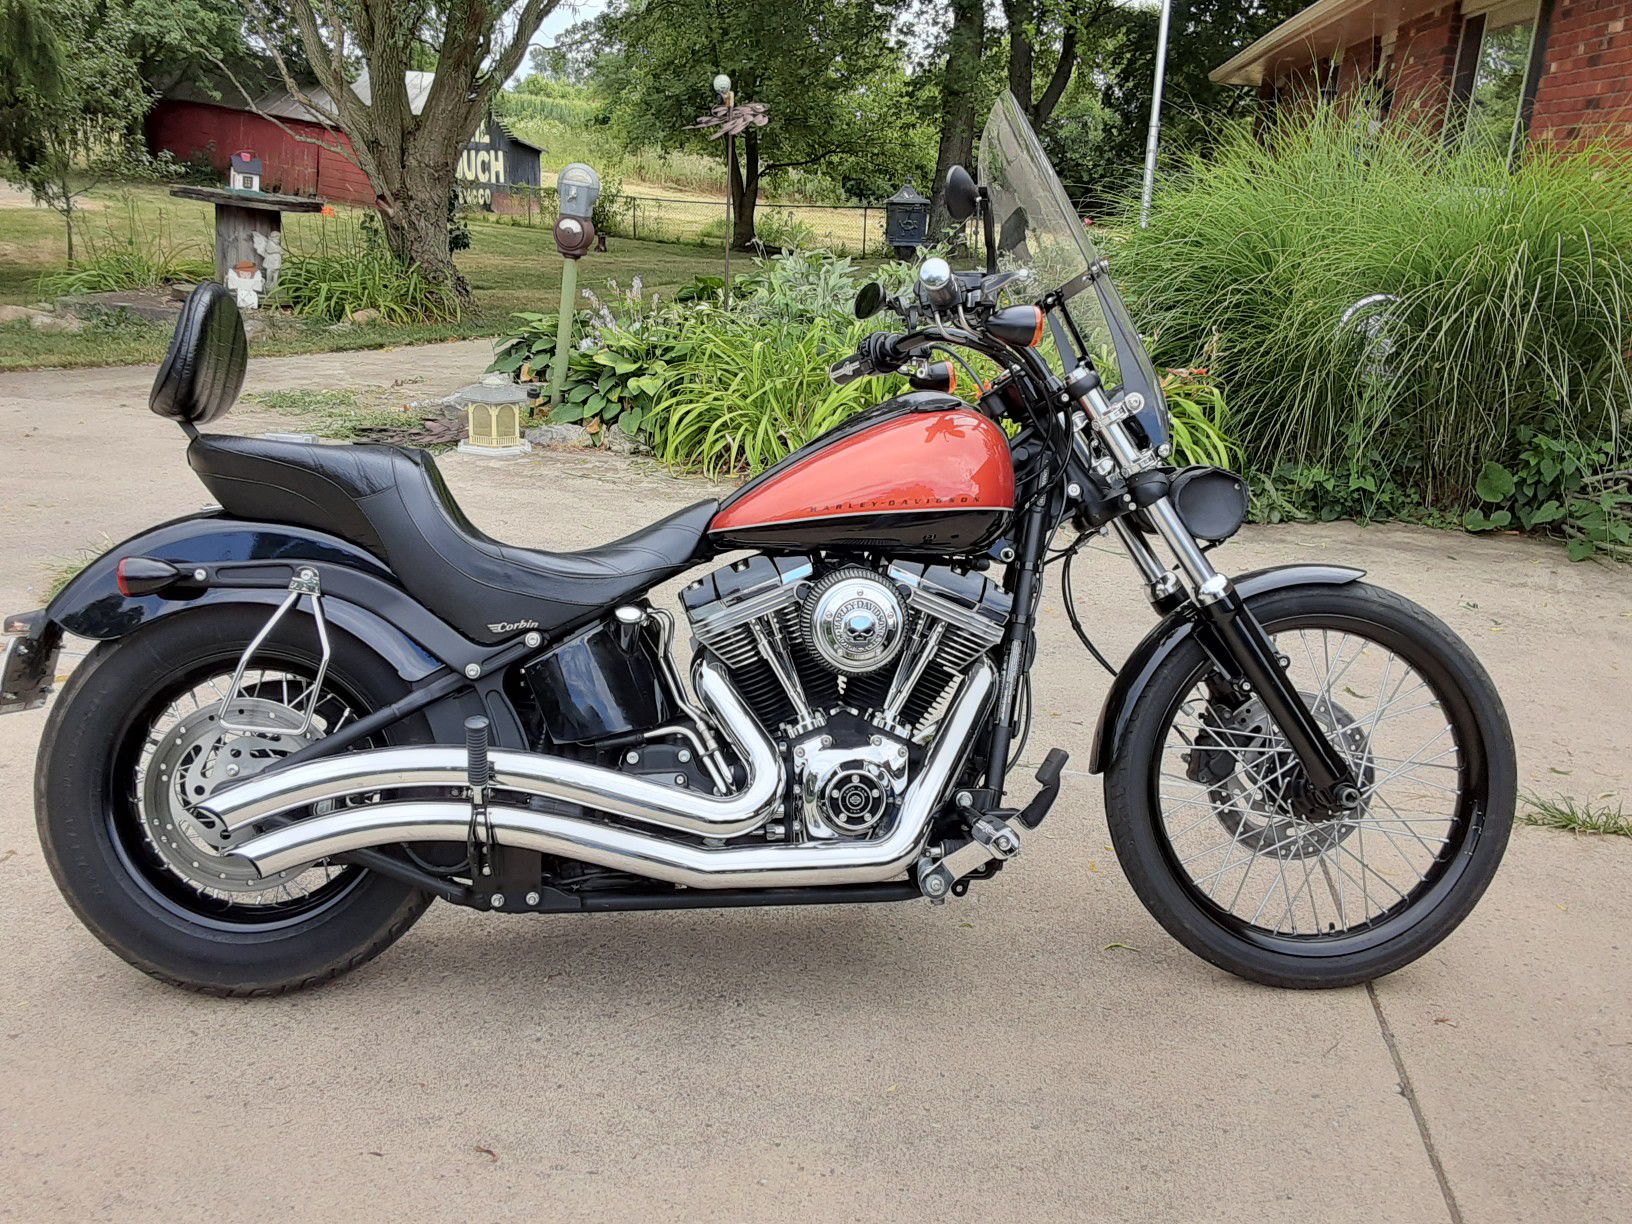 Harley Davidson custom black line very good condition extras skulls just service at low miles little beautiful bike asking 10.000